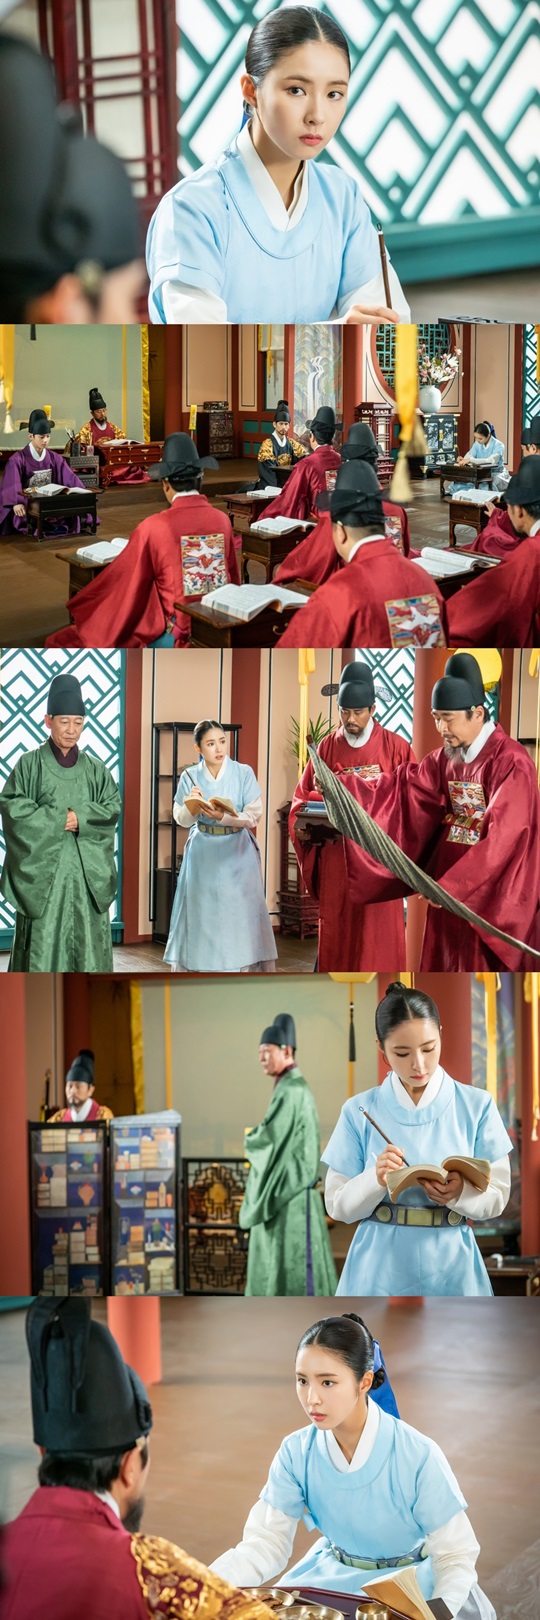 The MBC drama Na Hae-ryung (played by Kim Ho-soo / directed by Kang Il-soo, Han Hyun-hee / produced Green Snake Media) released a close recording of every move by Lee Tae (played by Shin Se-kyung) of Hamyoung-gun, Hyunwang, on the 22nd.Na Hae-ryung, starring Shin Se-kyung, Jung Eun-woo, and Park Ki-woong, is a full-length romance release by the first problematic first lady () Na Hae-ryung of Joseon and the anti-war mother Solo Prince Lee Rim (Chaung Eun-woo).Lee Ji-hoon, Park Ji-hyun and other young actors, Kim Min-Sang, Choi Deok-moon, and Sung Ji-ru are all acting actors.Na Hae-ryung, who overheard the conversation between Ham Young-gun and Choi Deok-moon in the 21-22th meeting of the new employee, was trapped in Oksa.With this incident, the officers of the temple declared a strike, and Hamyoung-gun shook hands with the inspector.While the adjustments such as Local Injury by Min Woo-won (Lee Ji-hoon) and Hogok Kwon-dang by Sungkyunkwans larvae are overturned, Na Hae-ryung, who was in the civil war entrance examination, is revealed and focuses his attention.In the open photo, a sharp eye was shown to Na Hae-ryung, who records every move of Hamyoung-gun.Na Hae-ryung, who was caught up in the conversation between Hamyoung and Ikpyeong before, followed Hamyoungs side day and night and is curious because he is concentrating on the record.Na Hae-ryung is trying to write down a lot of talk in the contest and a long line of appeals, or is having a crazy day recording the appearance of Ham Young-gun sitting on a plum frame.Na Hae-ryung, who can not stand it, is finally caught in a dirty solo between Ham Young-gun and the liquor.Na Hae-ryung looking at Hamyoung-gun with his eyes in resolution.Na Hae-ryung and Ham Young-guns tight battle continues, and I wonder who will be the last winner.Na Hae-ryung, a new employee, said, Na Hae-ryung, who is trapped in Oksa, is released and follows every move of Hamyoung County. I hope you will confirm what kind of conversation will come and go between the two enormous people.Na Hae-ryung, starring Shin Se-kyung, Jung Eun-woo and Park Ki-woong, airs 23-24 episodes today (22nd) Thursday night at 8:55 p.m.